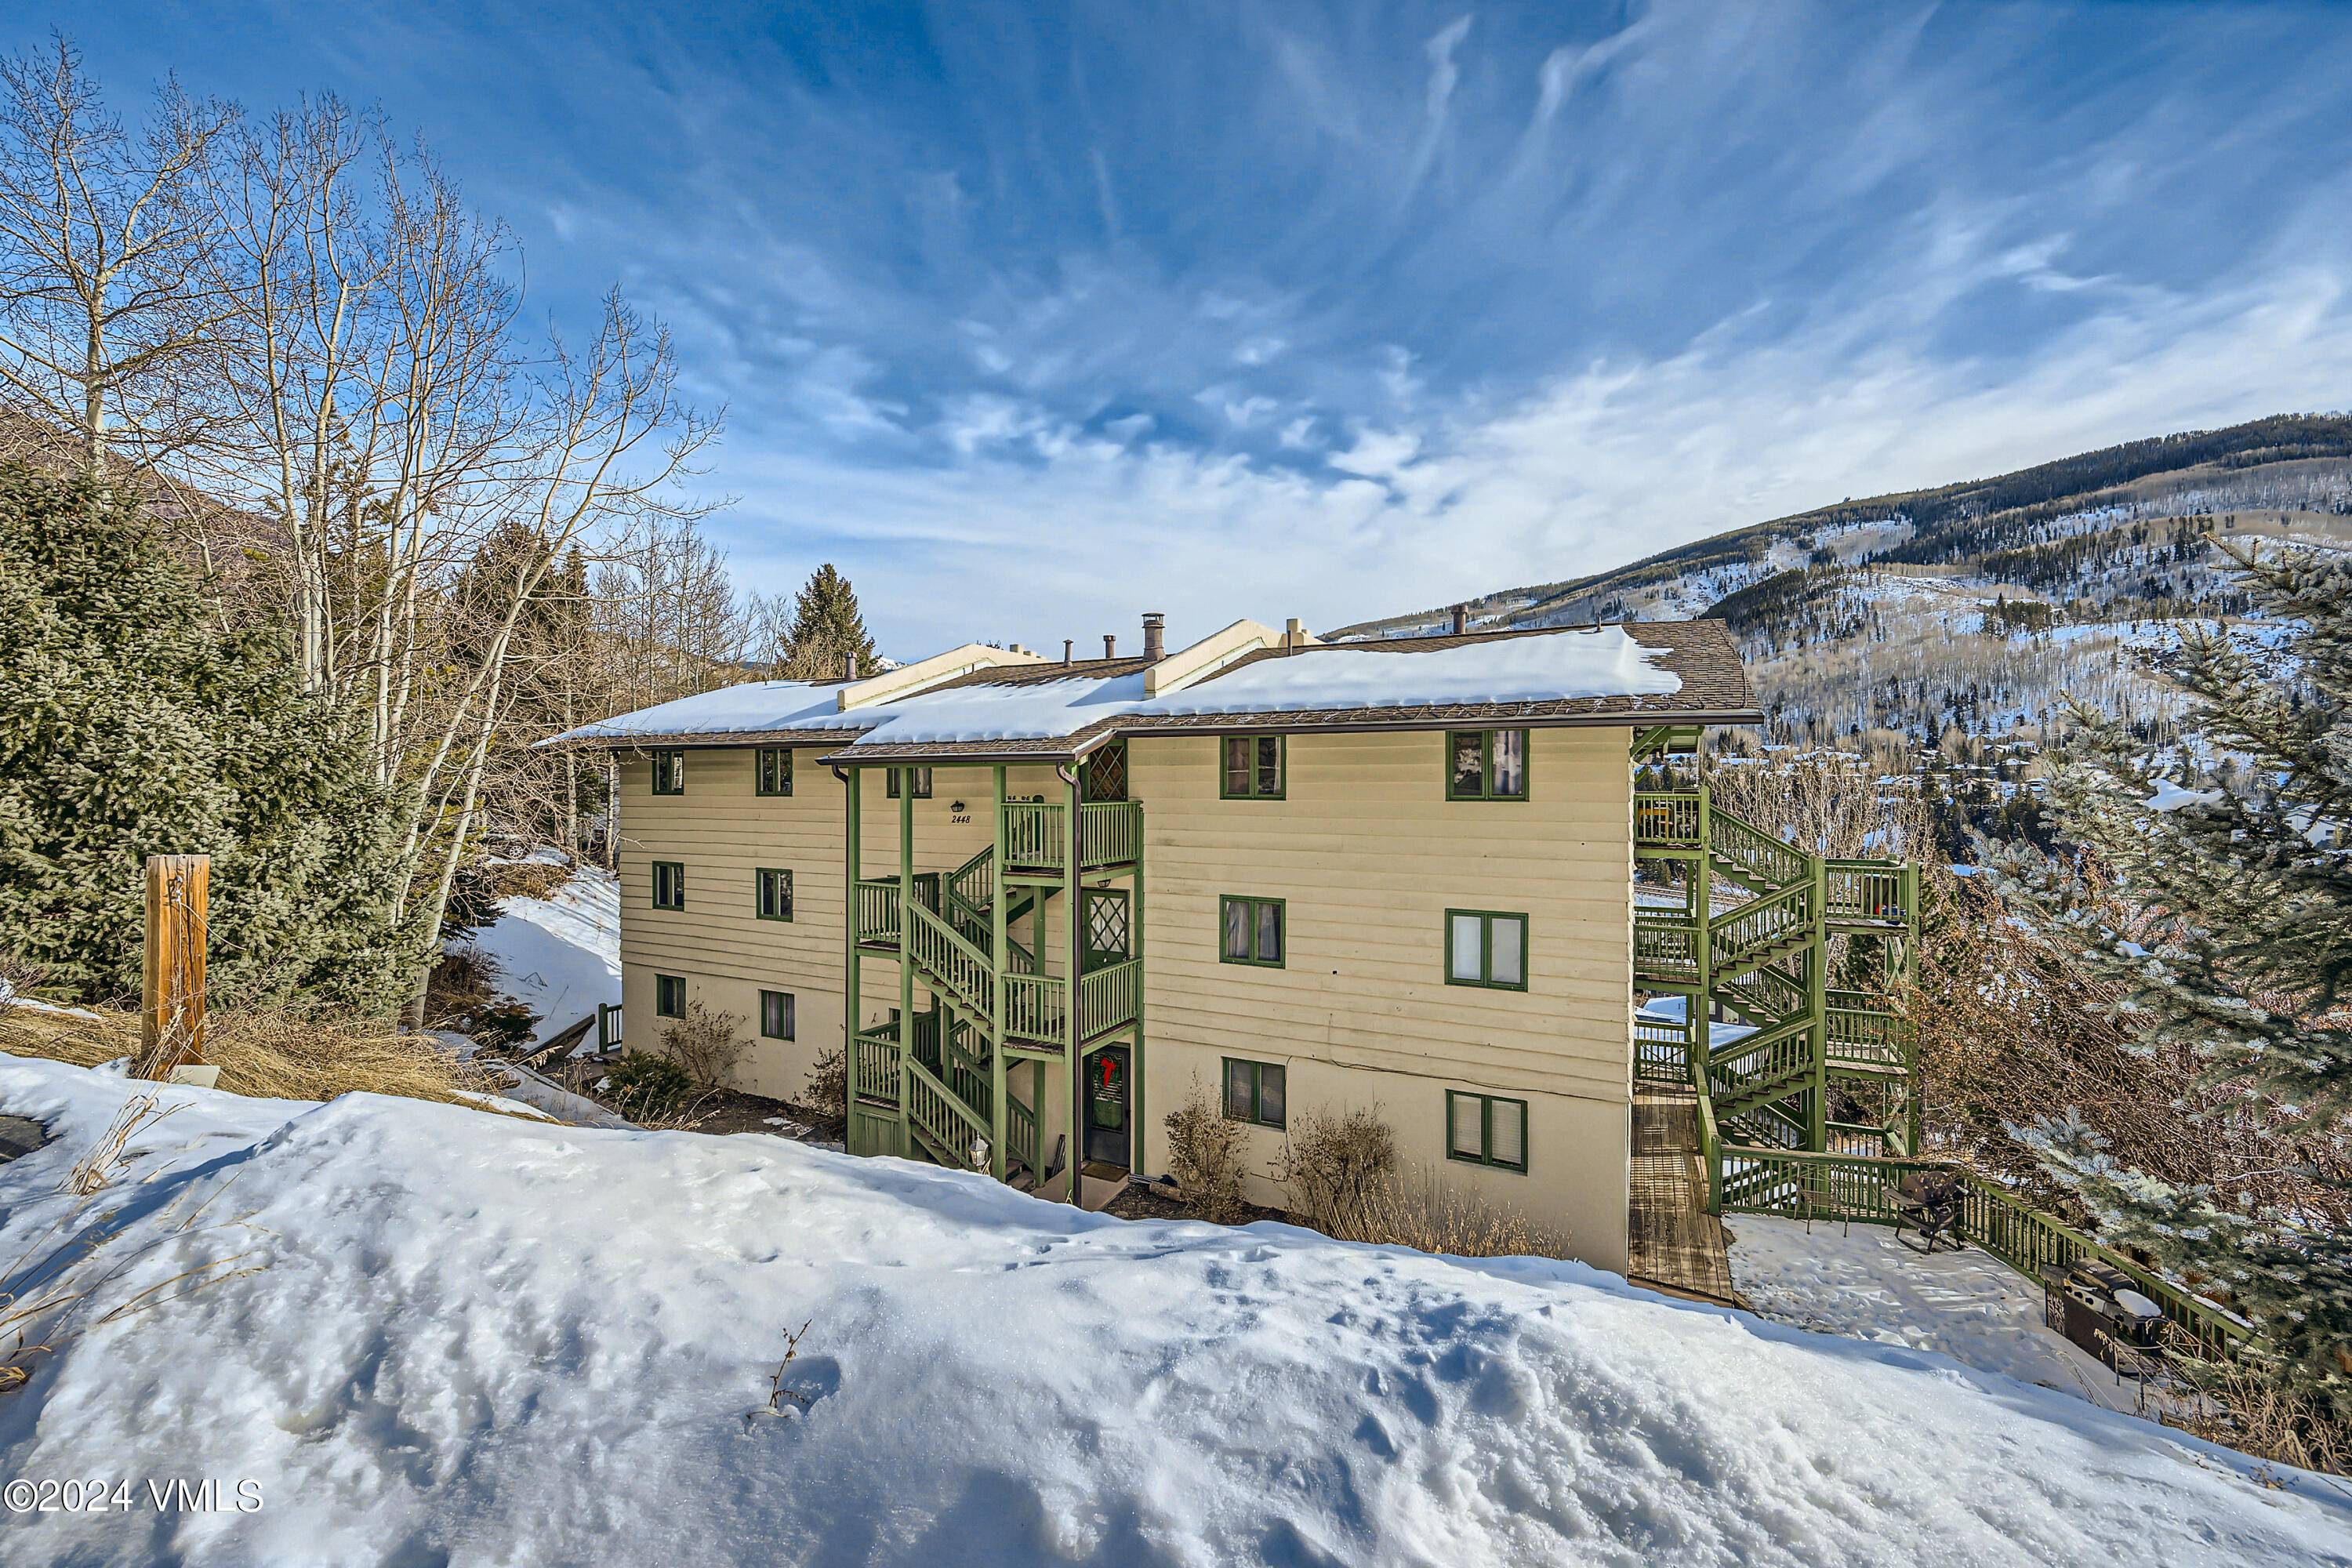 Embrace the mountain lifestyle you deserve in this beautifully remodeled 2 bedroom, 1 bath end unit condo.